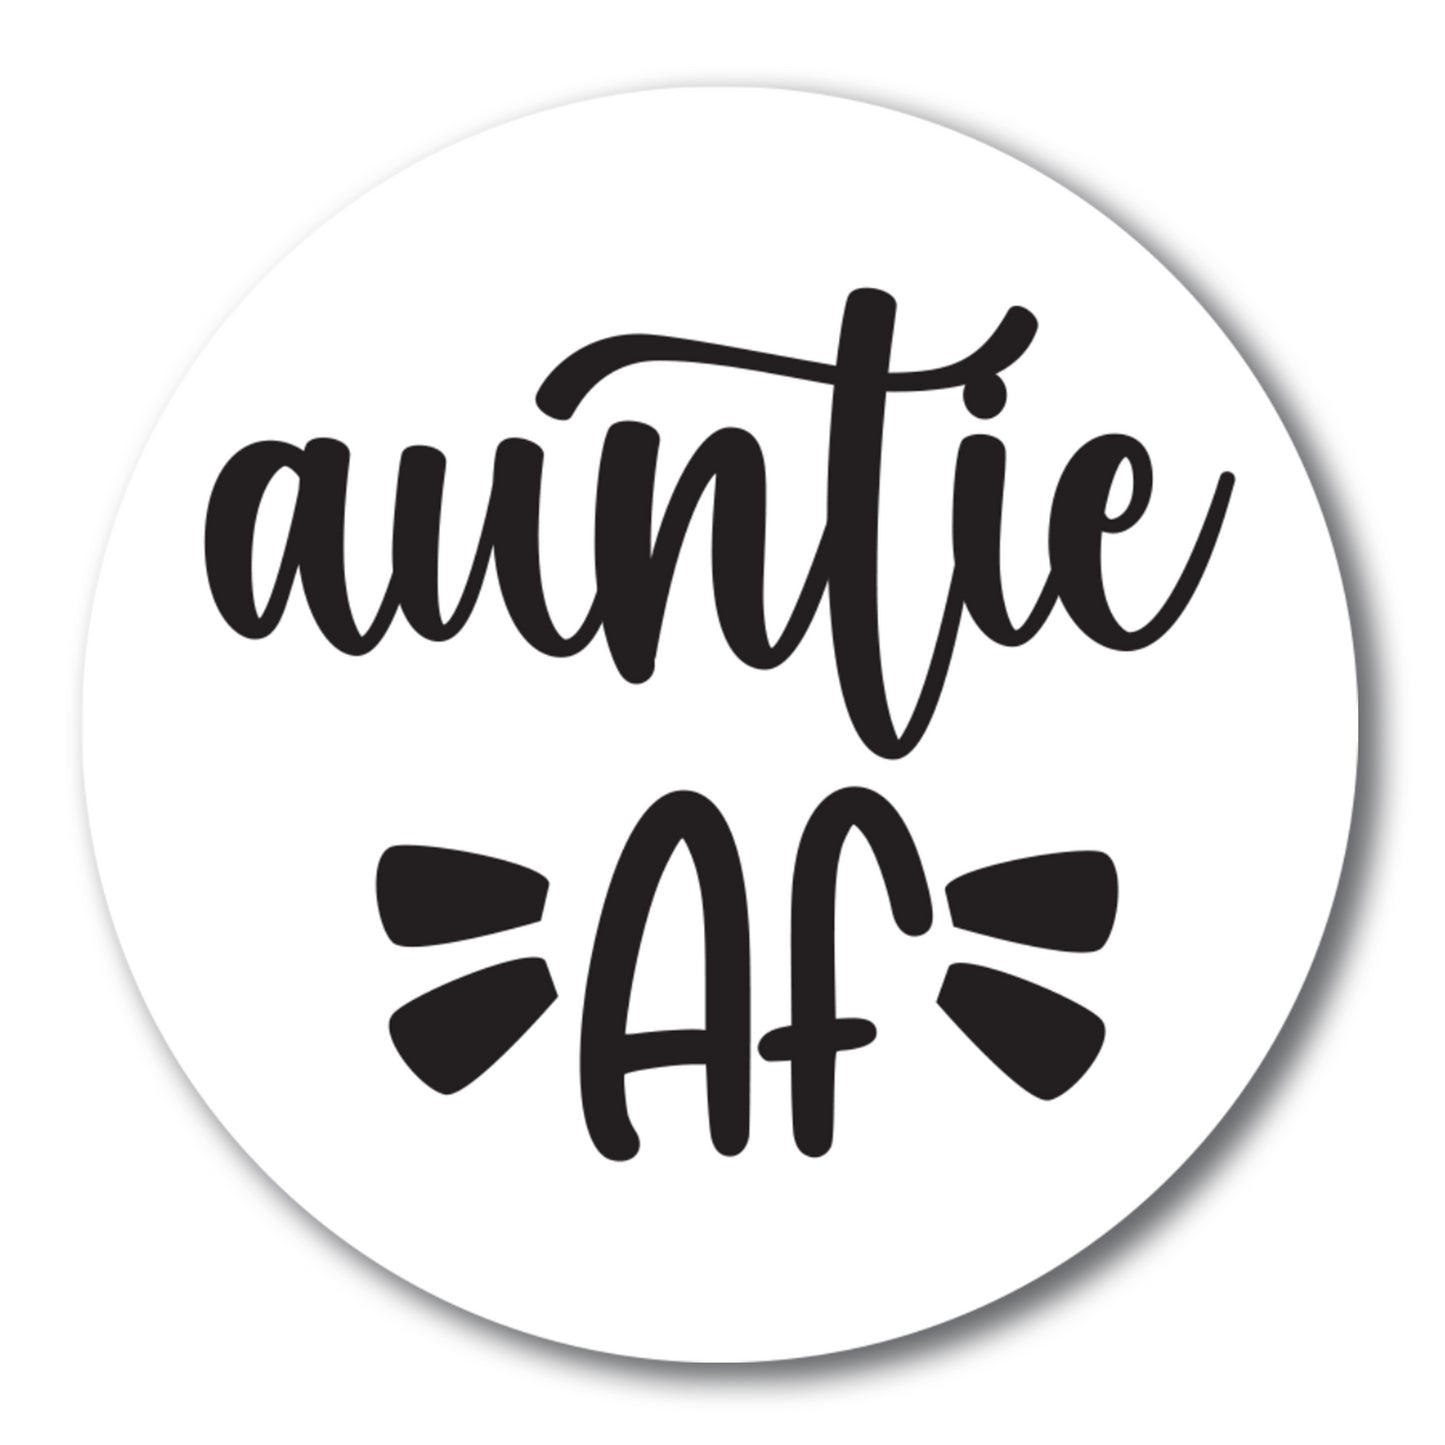 Magnet Me Up Funny Cute Auntie AF Magnet Decal, 5 Inch, Heavy Duty Automotive Magnet for Car Truck SUV Or Any Other Magnetic Surface, for Aunts, Made in USA